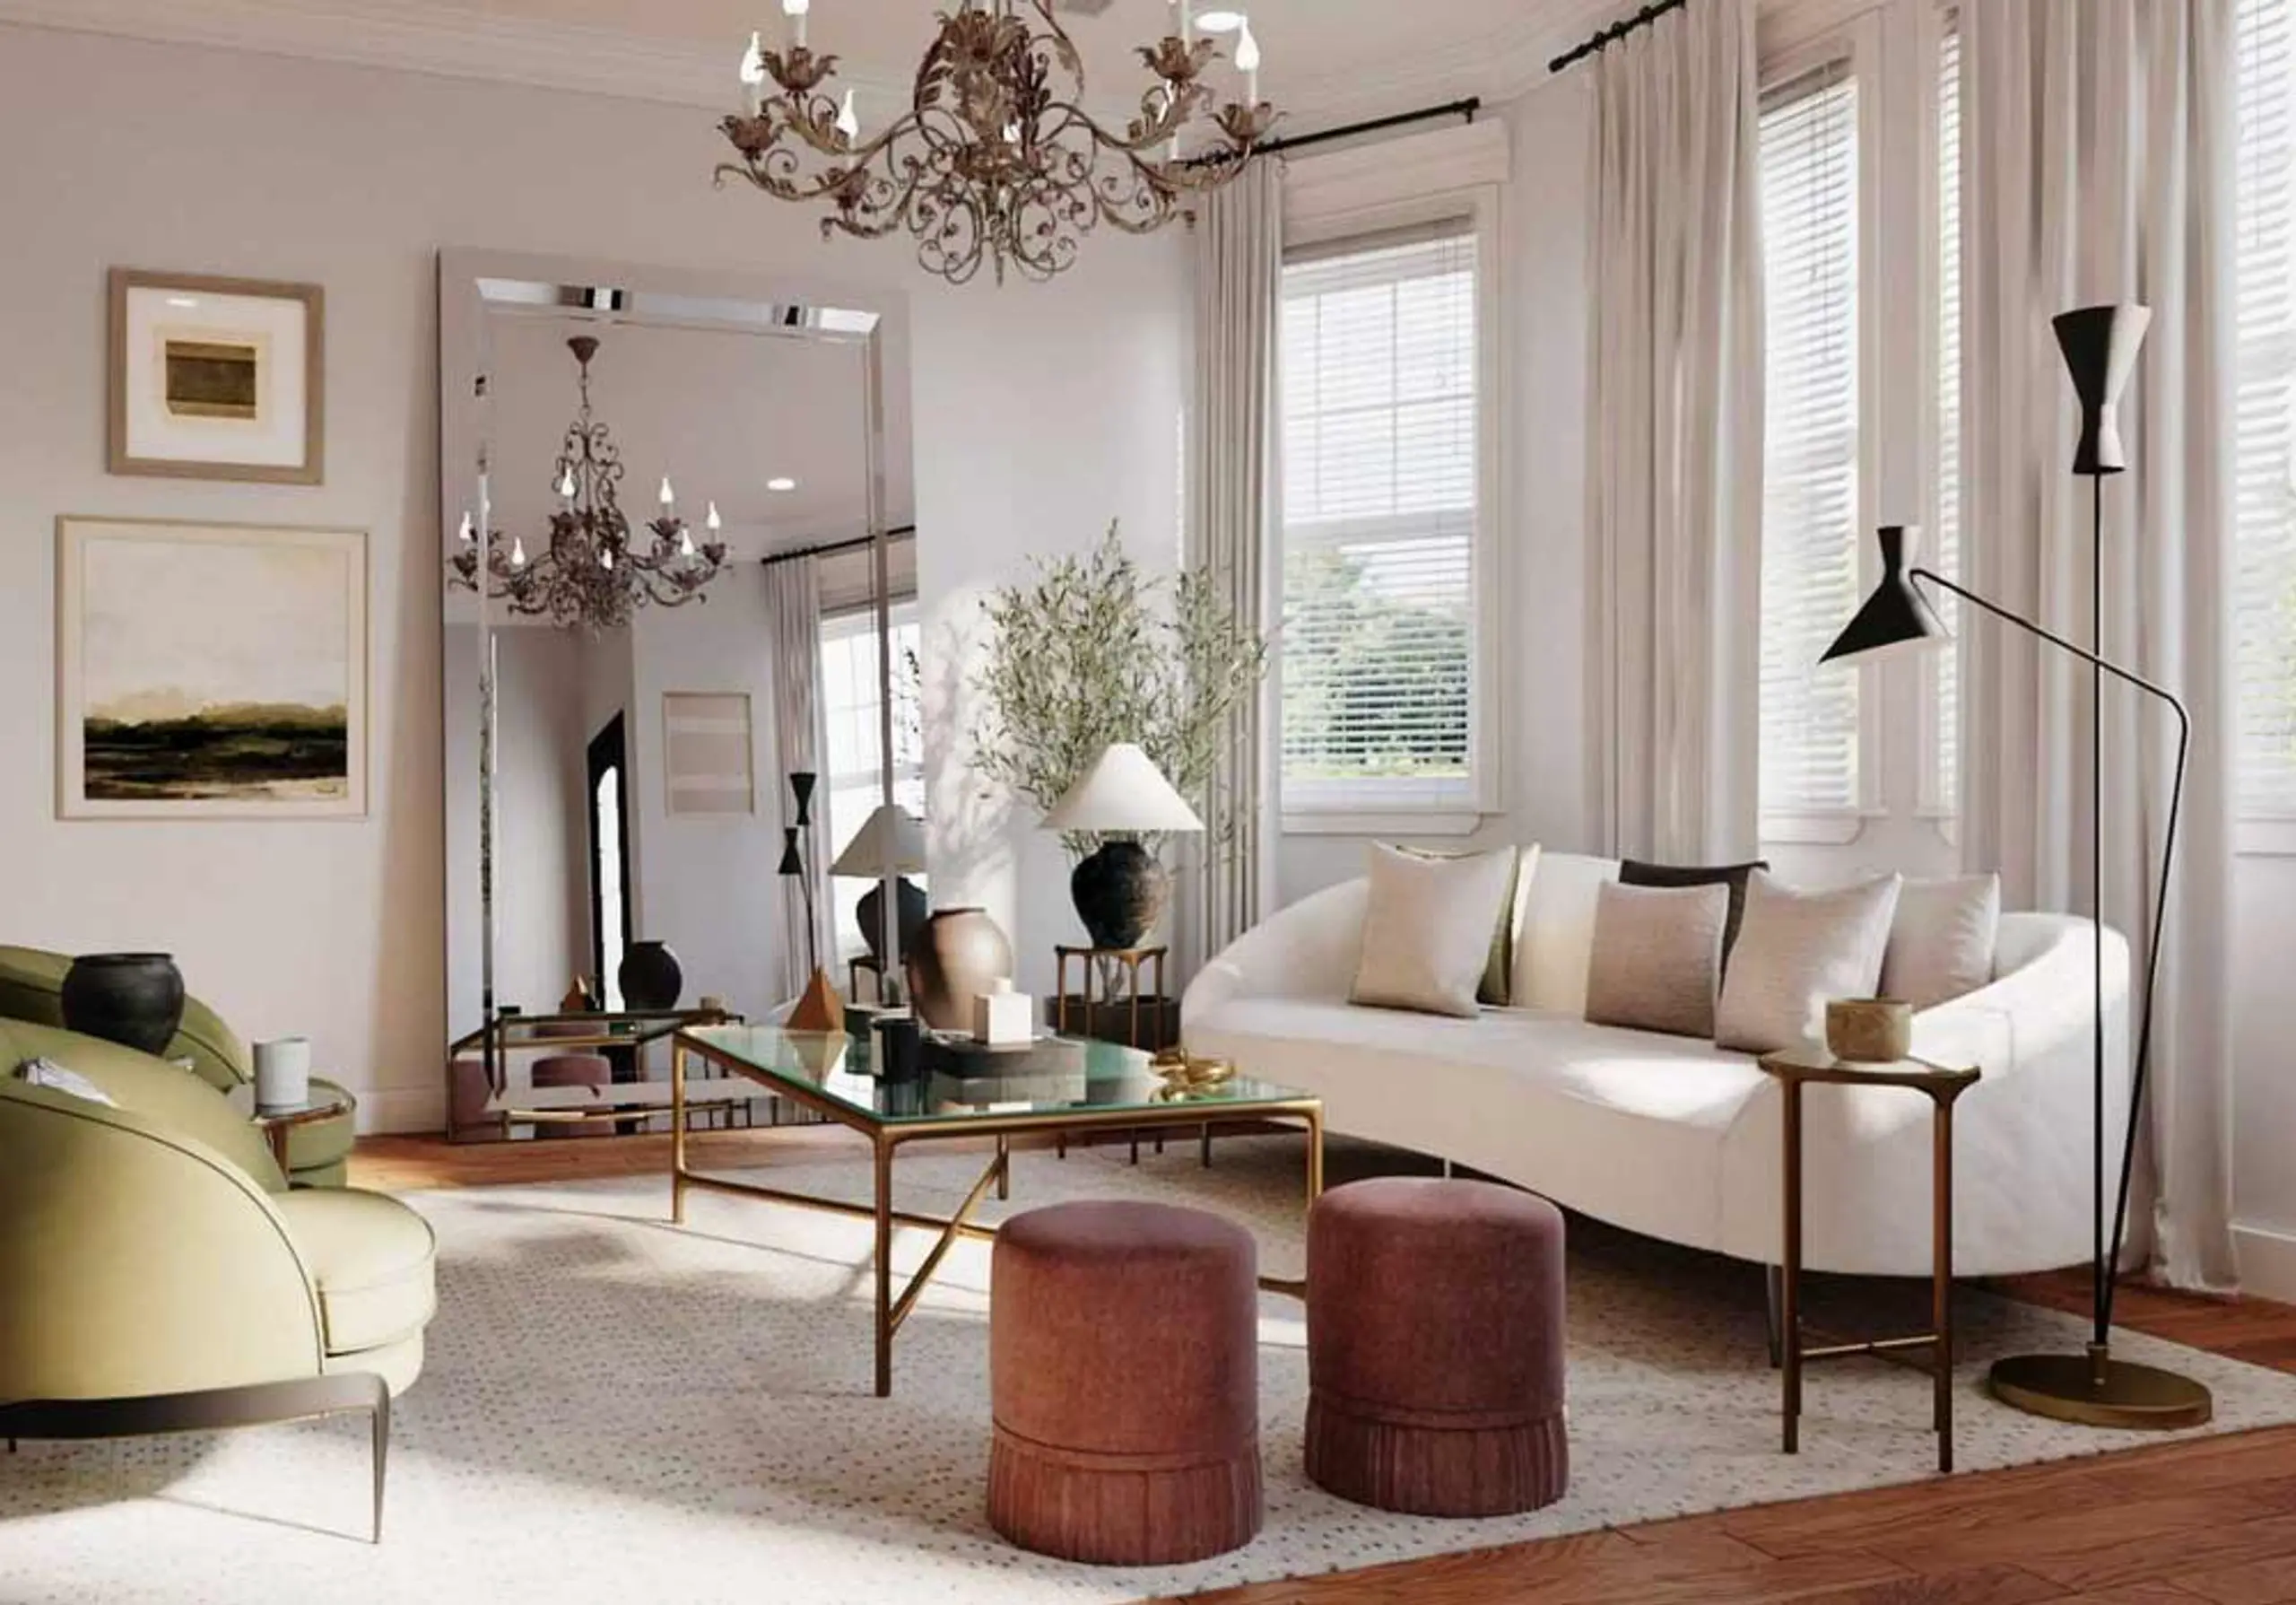 Living Room Decor Ideas for Creating a Welcoming Space - Aspect